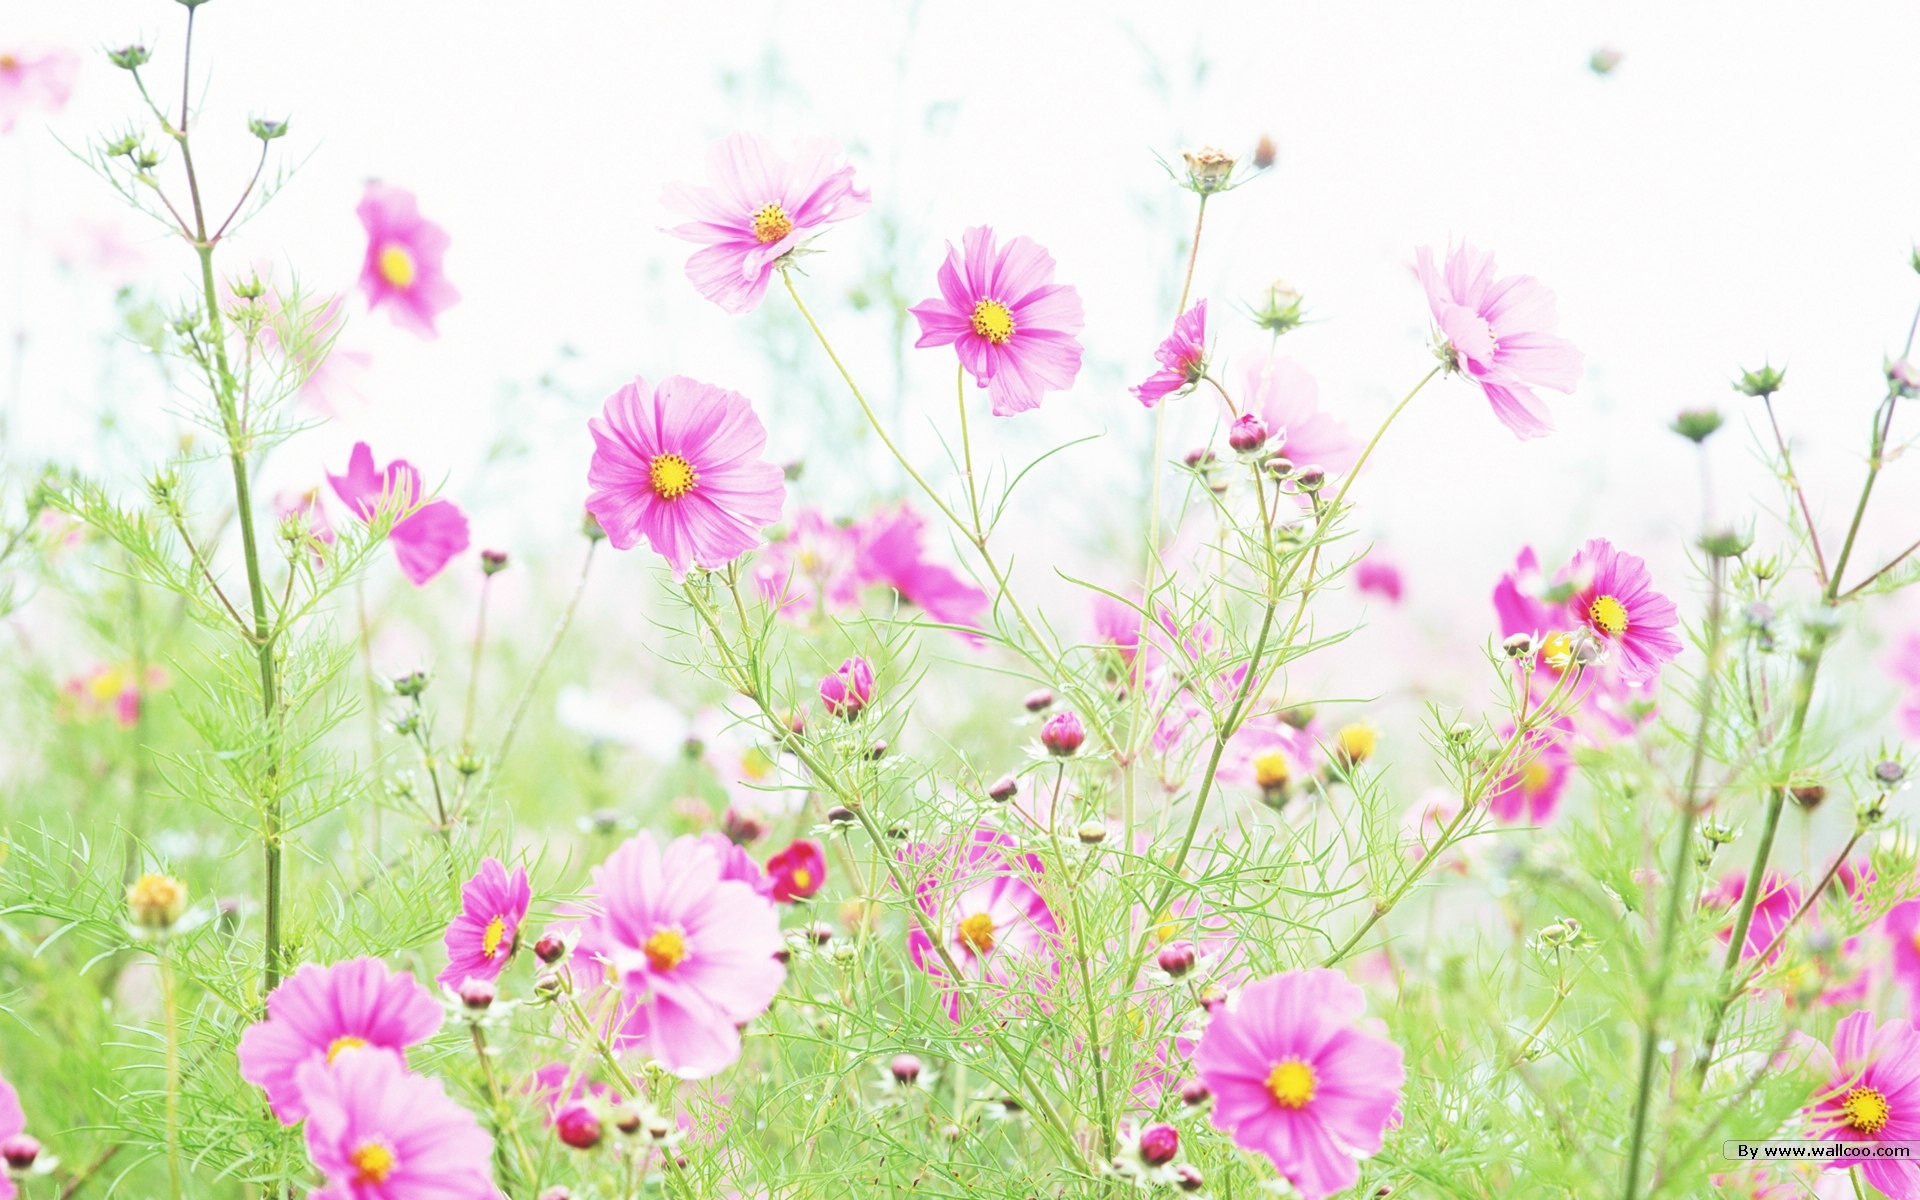 Fresh style Flowers Wallpapers #3 - 1920x1200